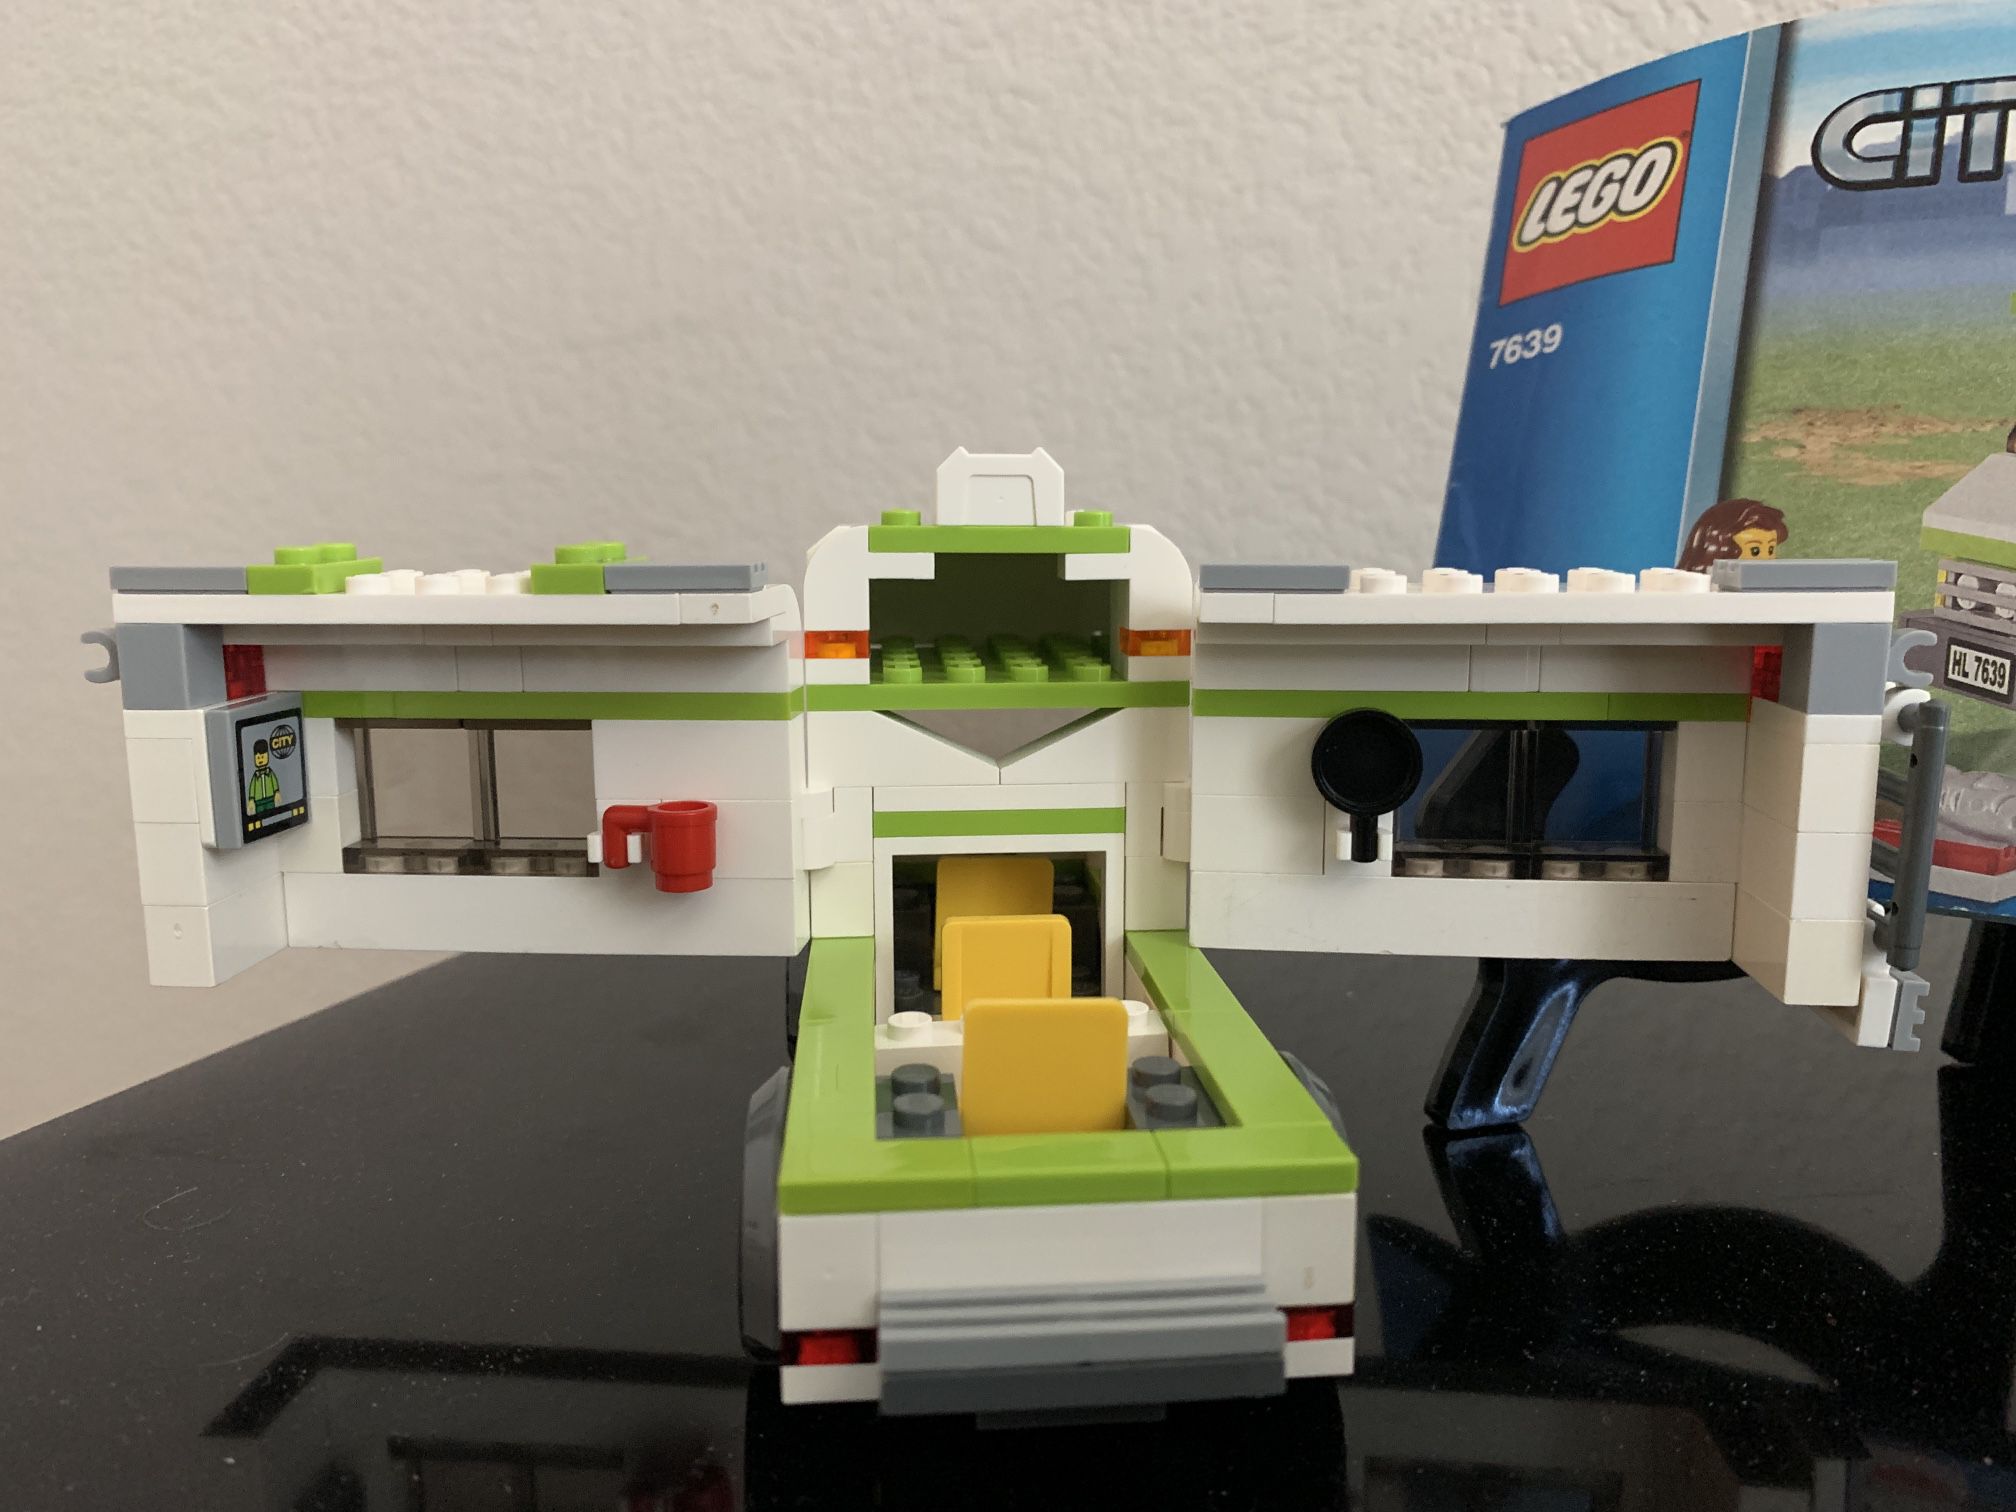 Lego City - Camper - 7639 for in Annetta North, TX - OfferUp